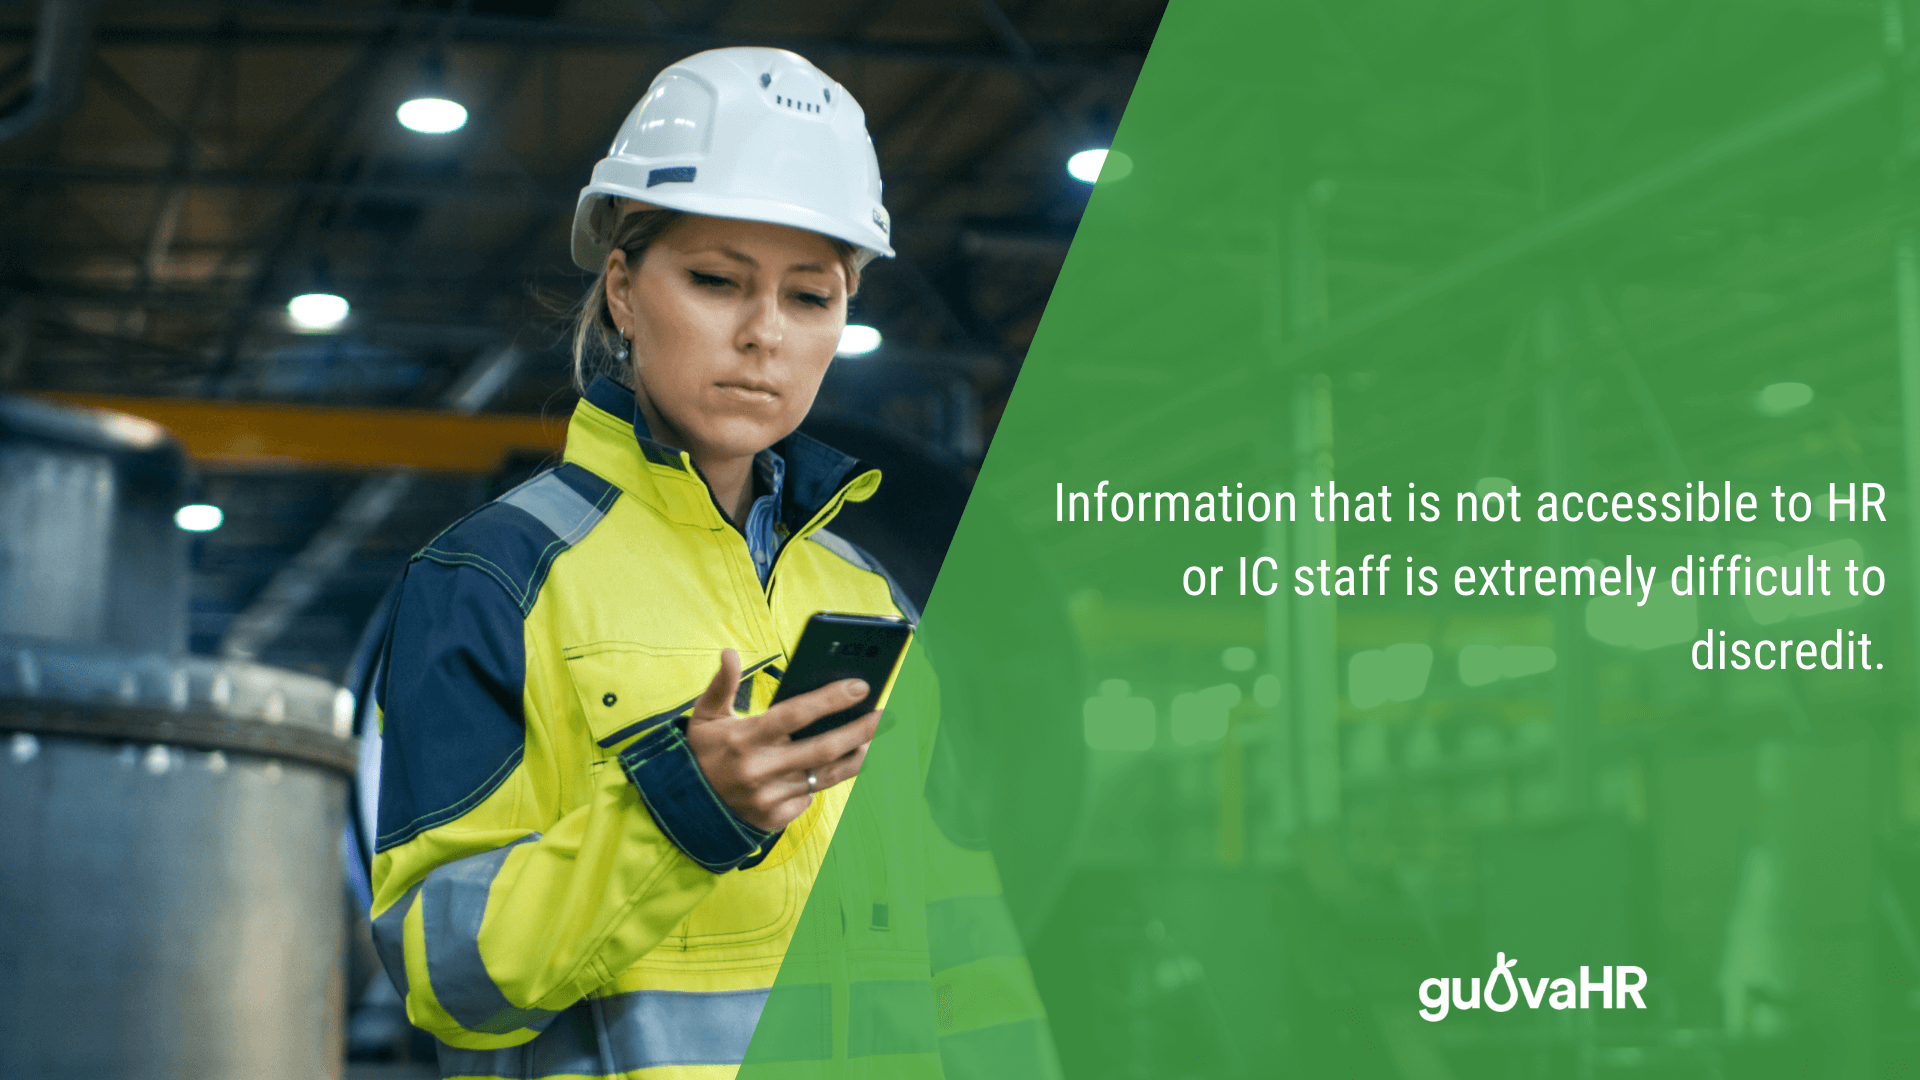 Female worker in safety clothing using a smart phone and an internal communication quote saying "Information that is not accessible to HR or IC staff is extremely difficult to discredit."